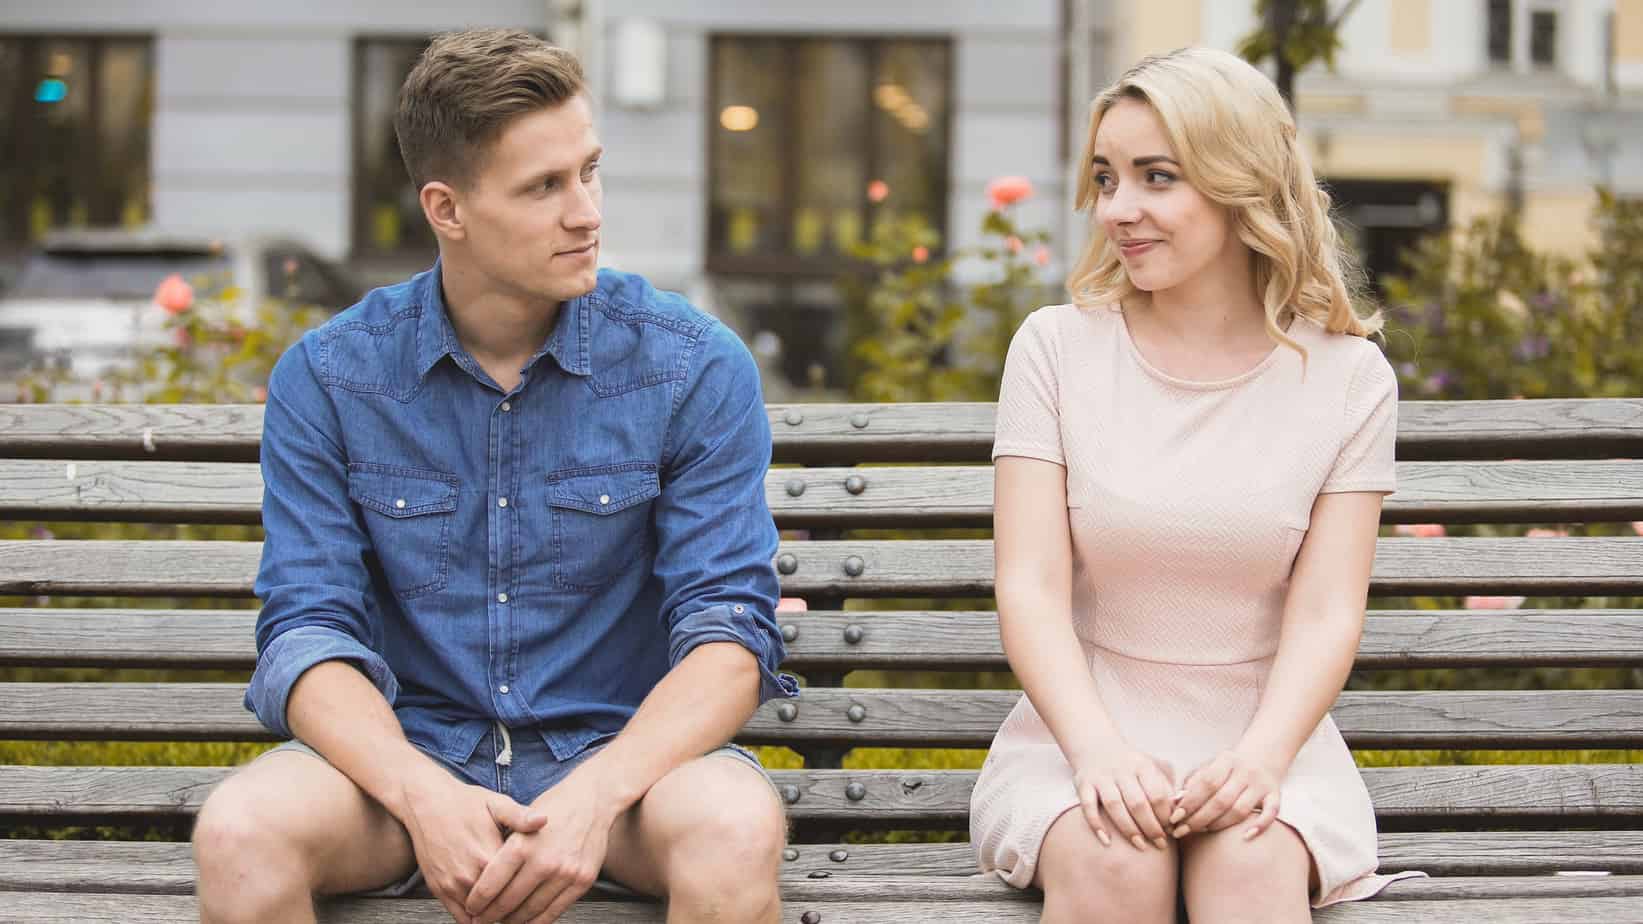 A man and a woman sitting on a bench